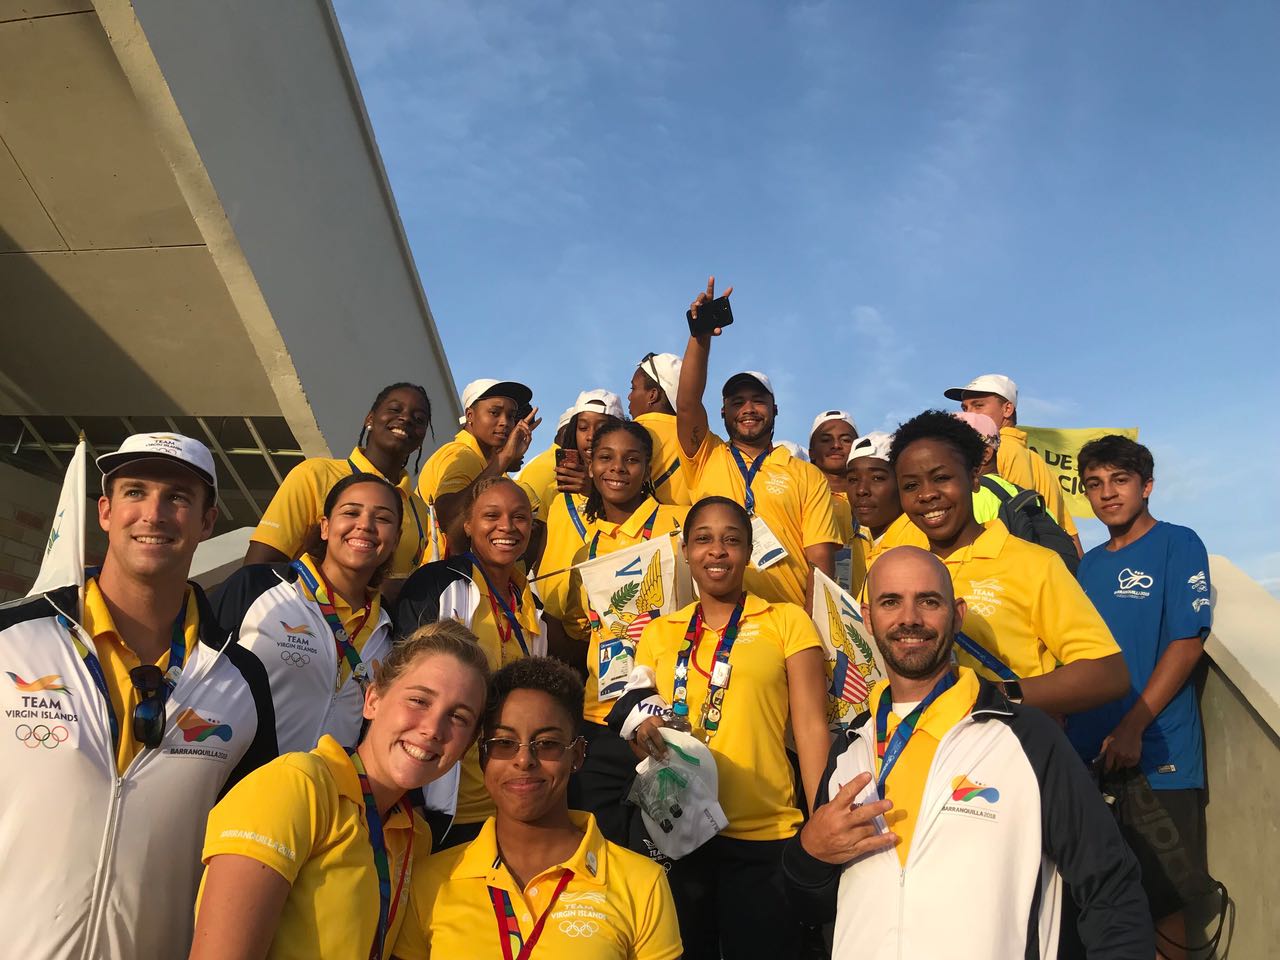 You are currently viewing Delegation of Virgin Islands Athletes set to compete in 2018 Central American and Caribbean Games